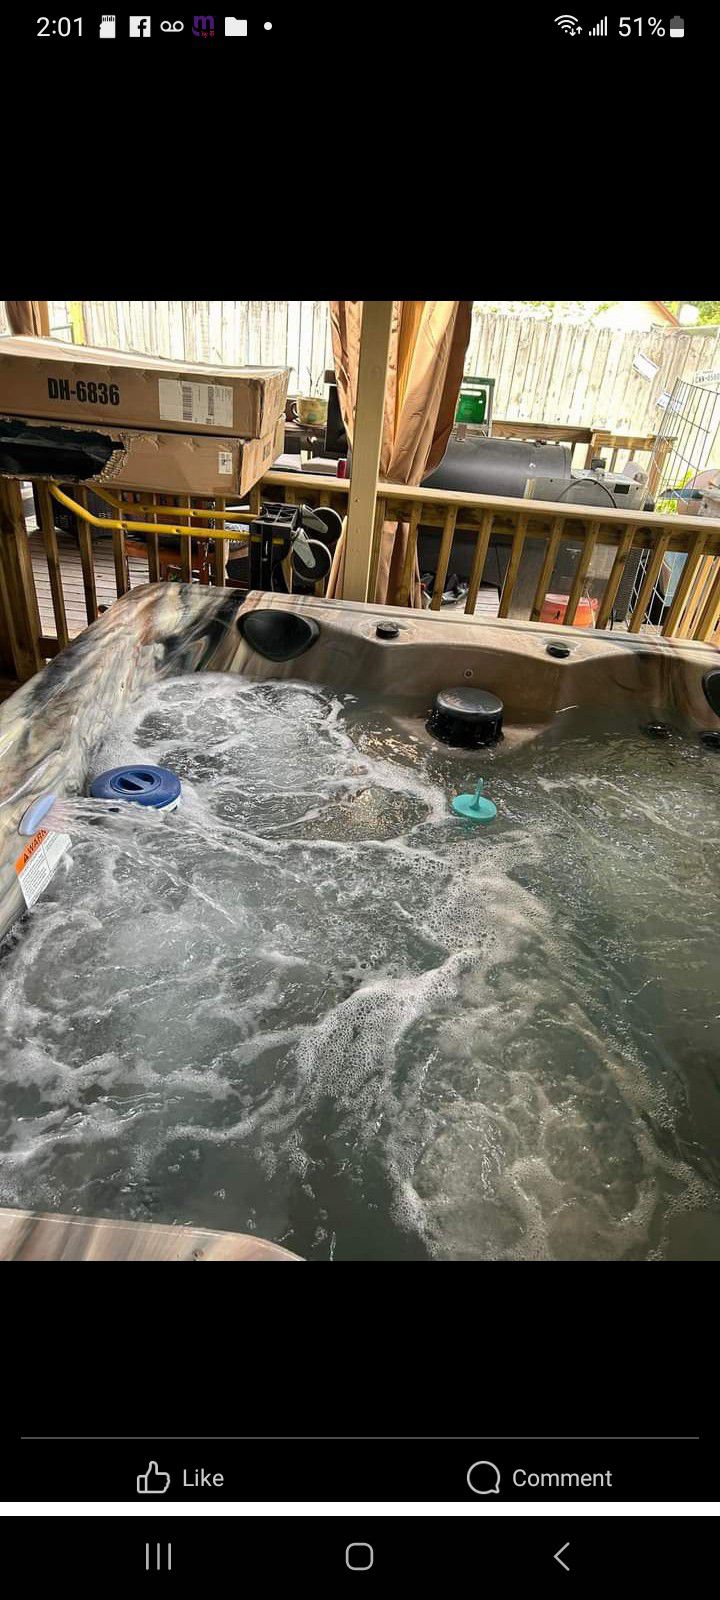 Hot TUB FITS 7 PEOPLE FOR SALE BY OWNER! MARBLE  AND HEATED OPTION GREAT ALL YEAR!